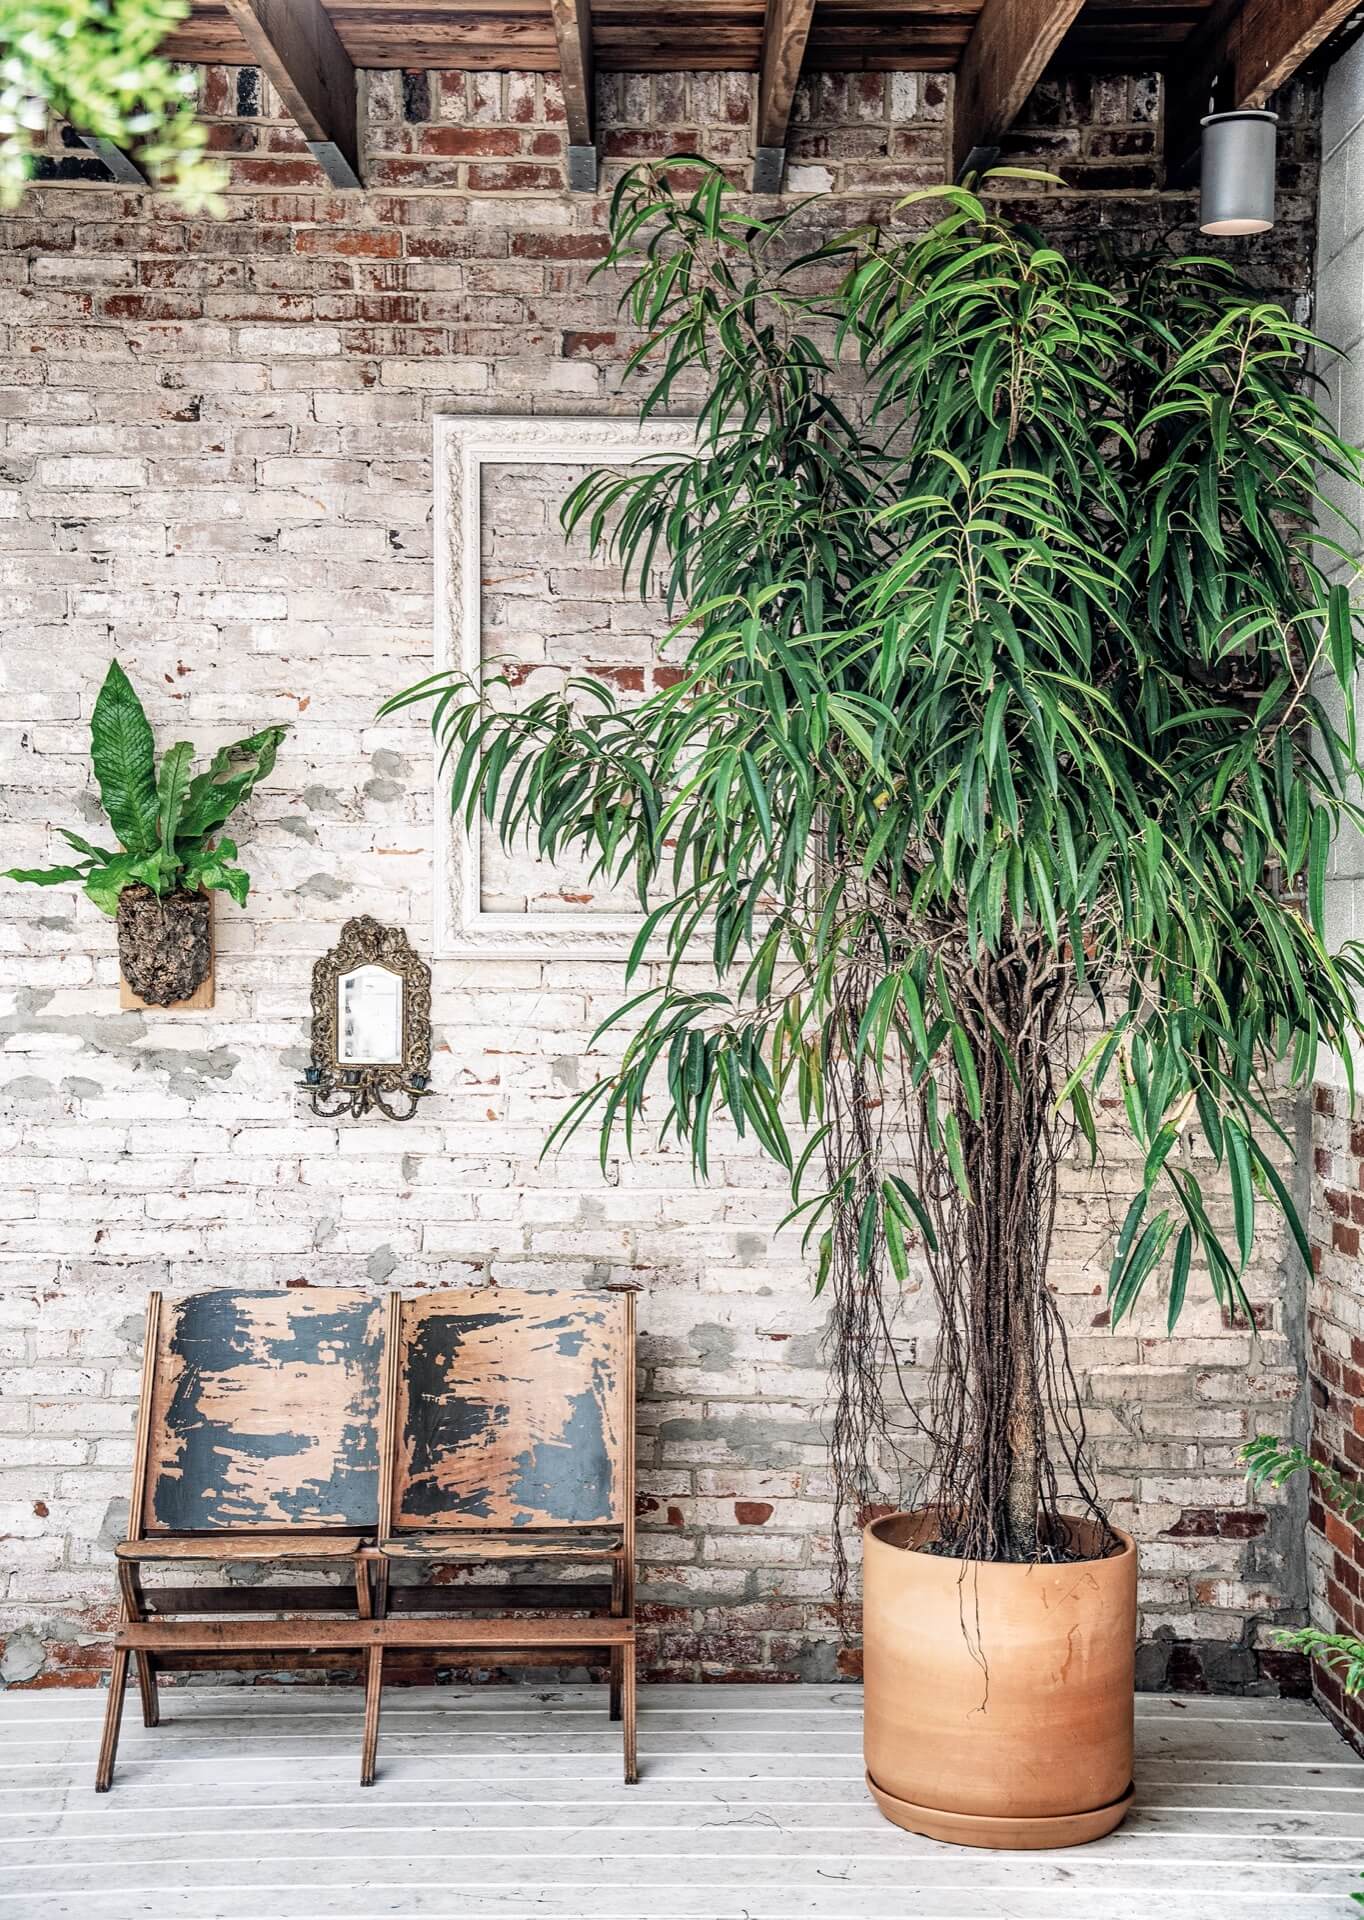 vintage seating in front of exposed brick wall and a large potted plant